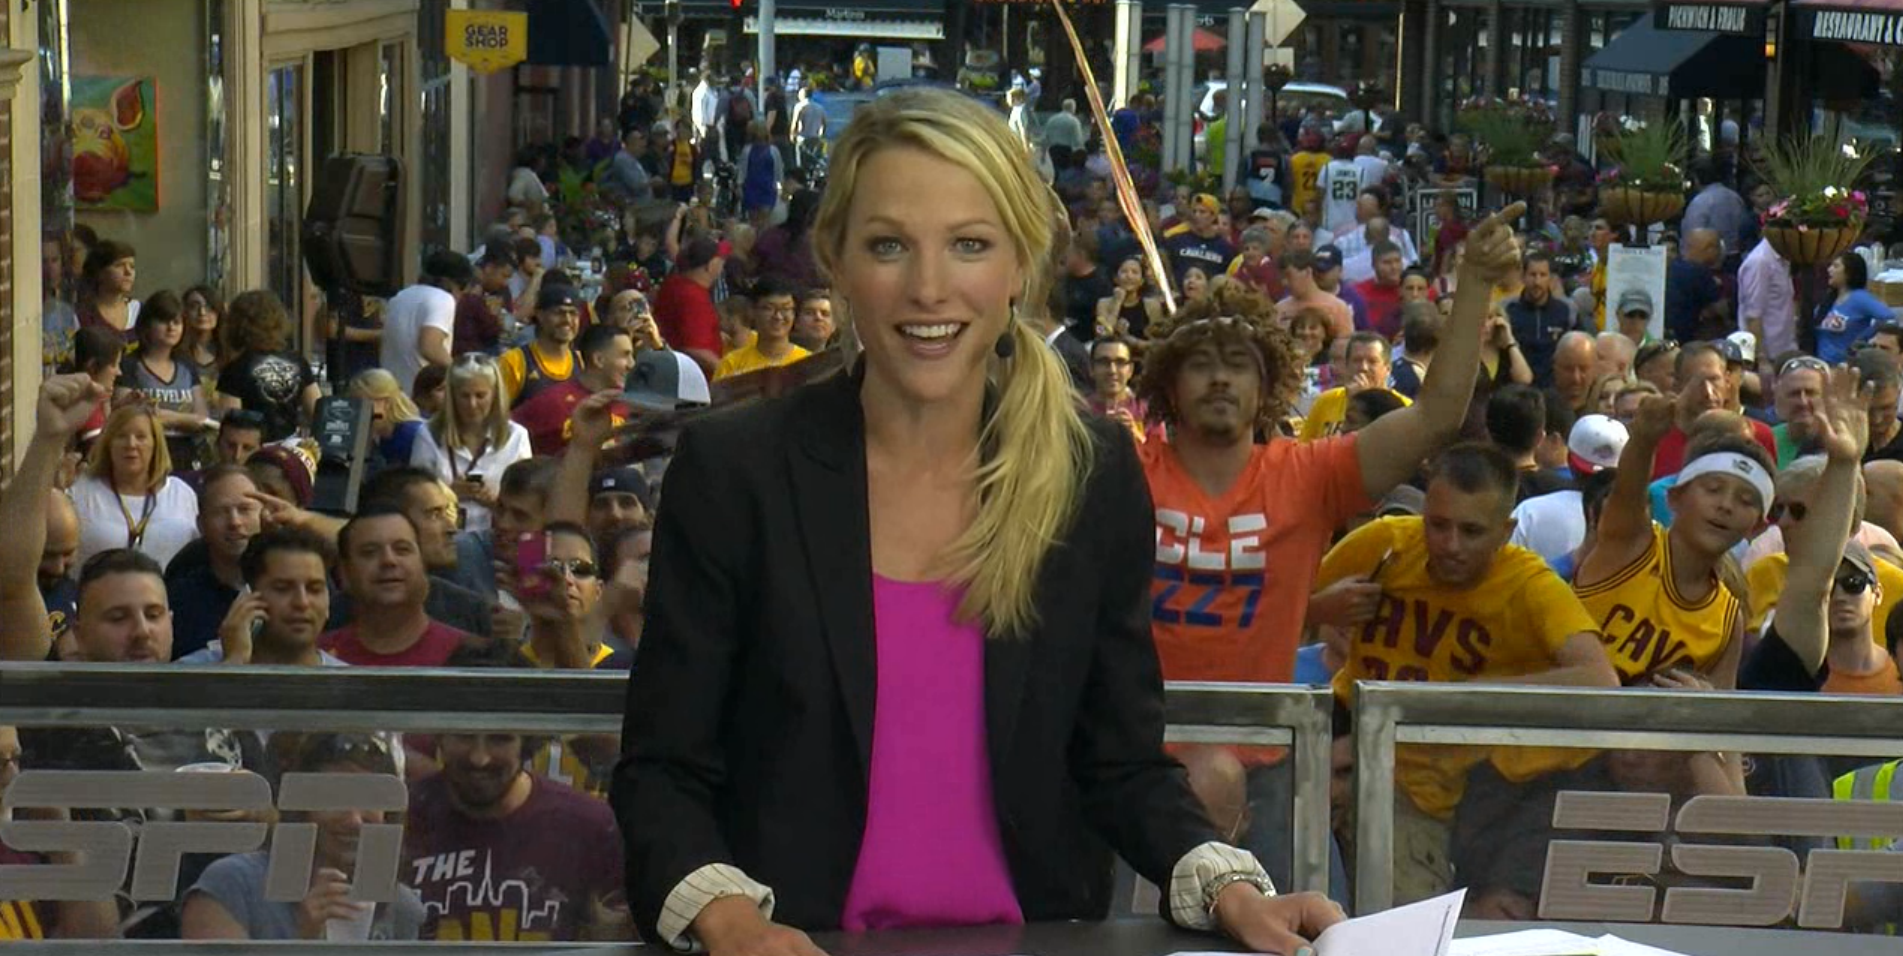 SportsCenter - and raucous crowds - returns to 4th Street in Cleveland - ESPN Front Row1903 x 956